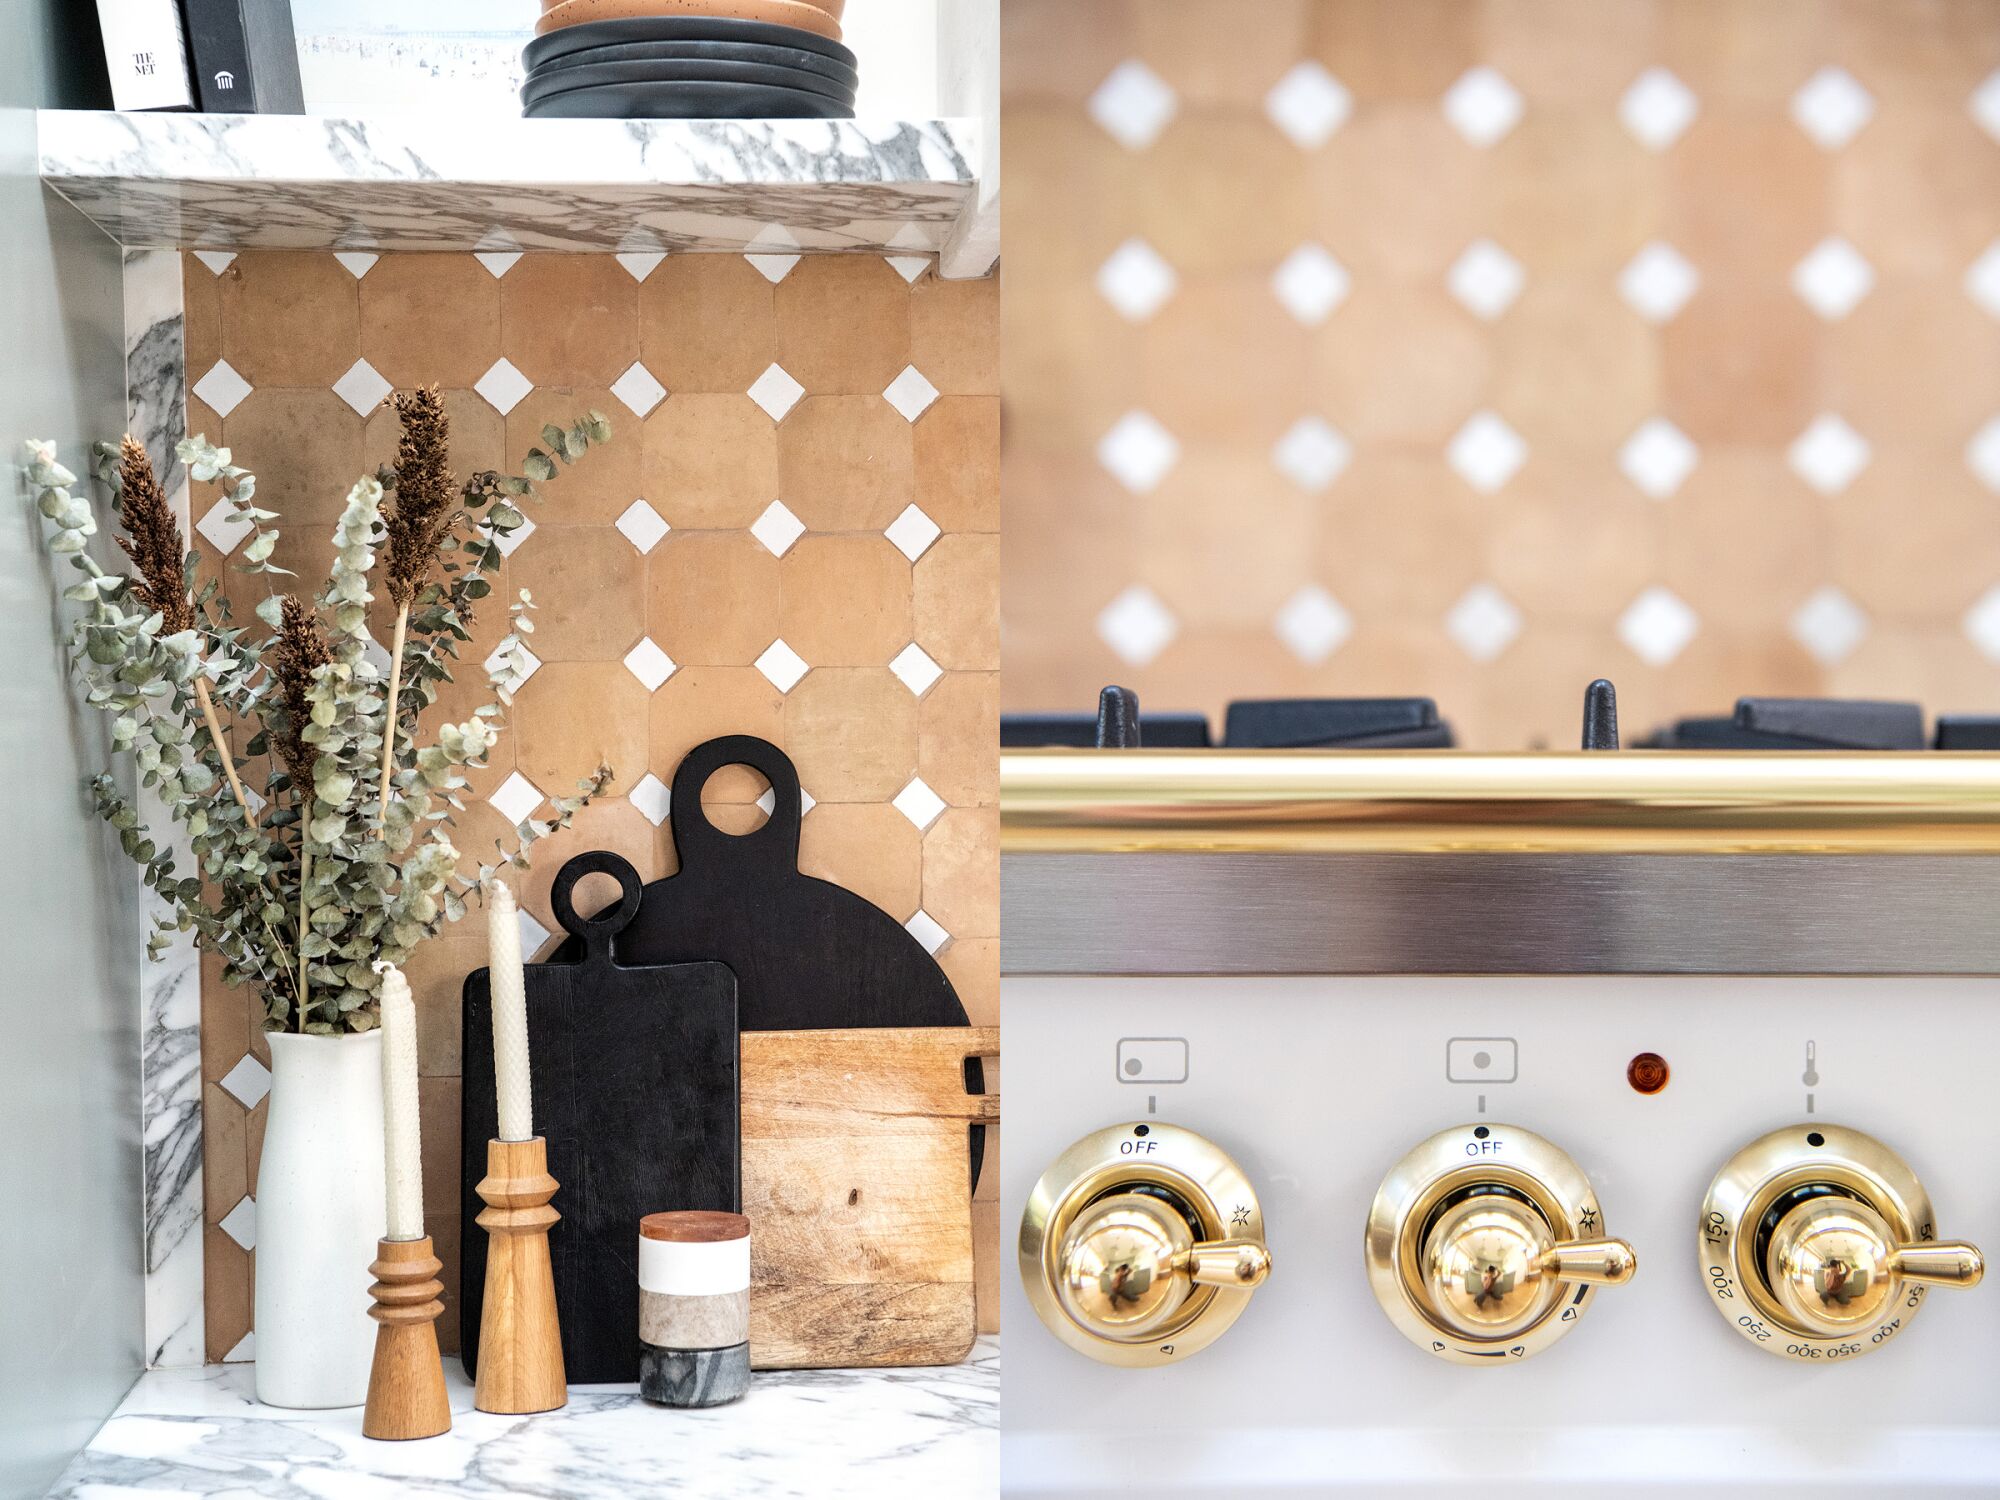 Two pictures side by side featuring the details of a kitchen.